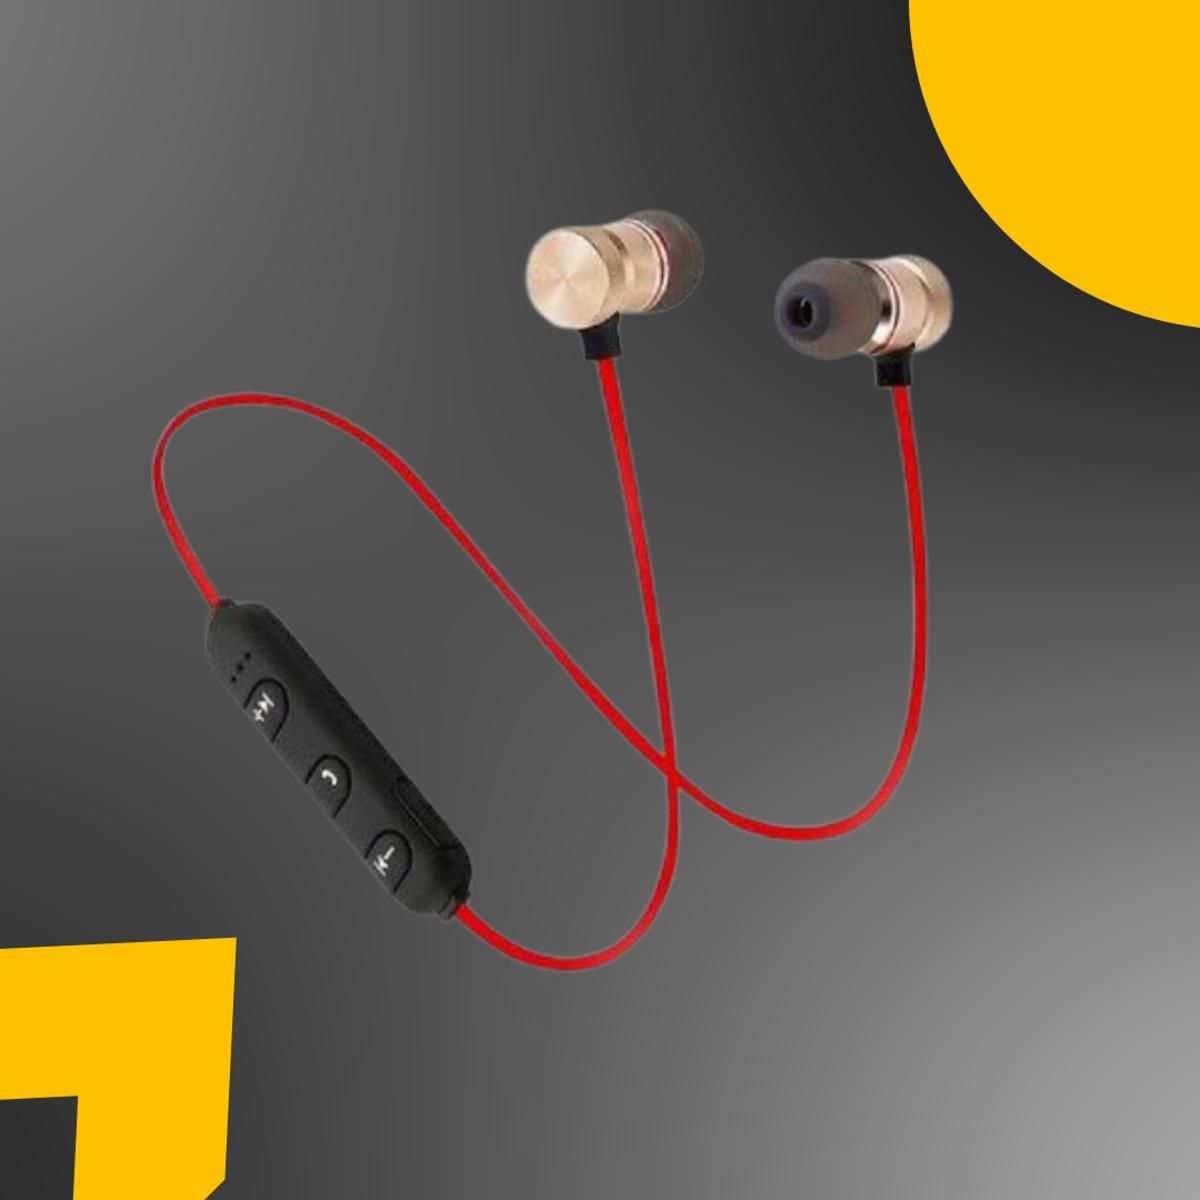 Buy Wireless Bluetooth Sports Hand free Earphone Magnet Headset Handfree  Multicolor at Lowest Price in Pakistan